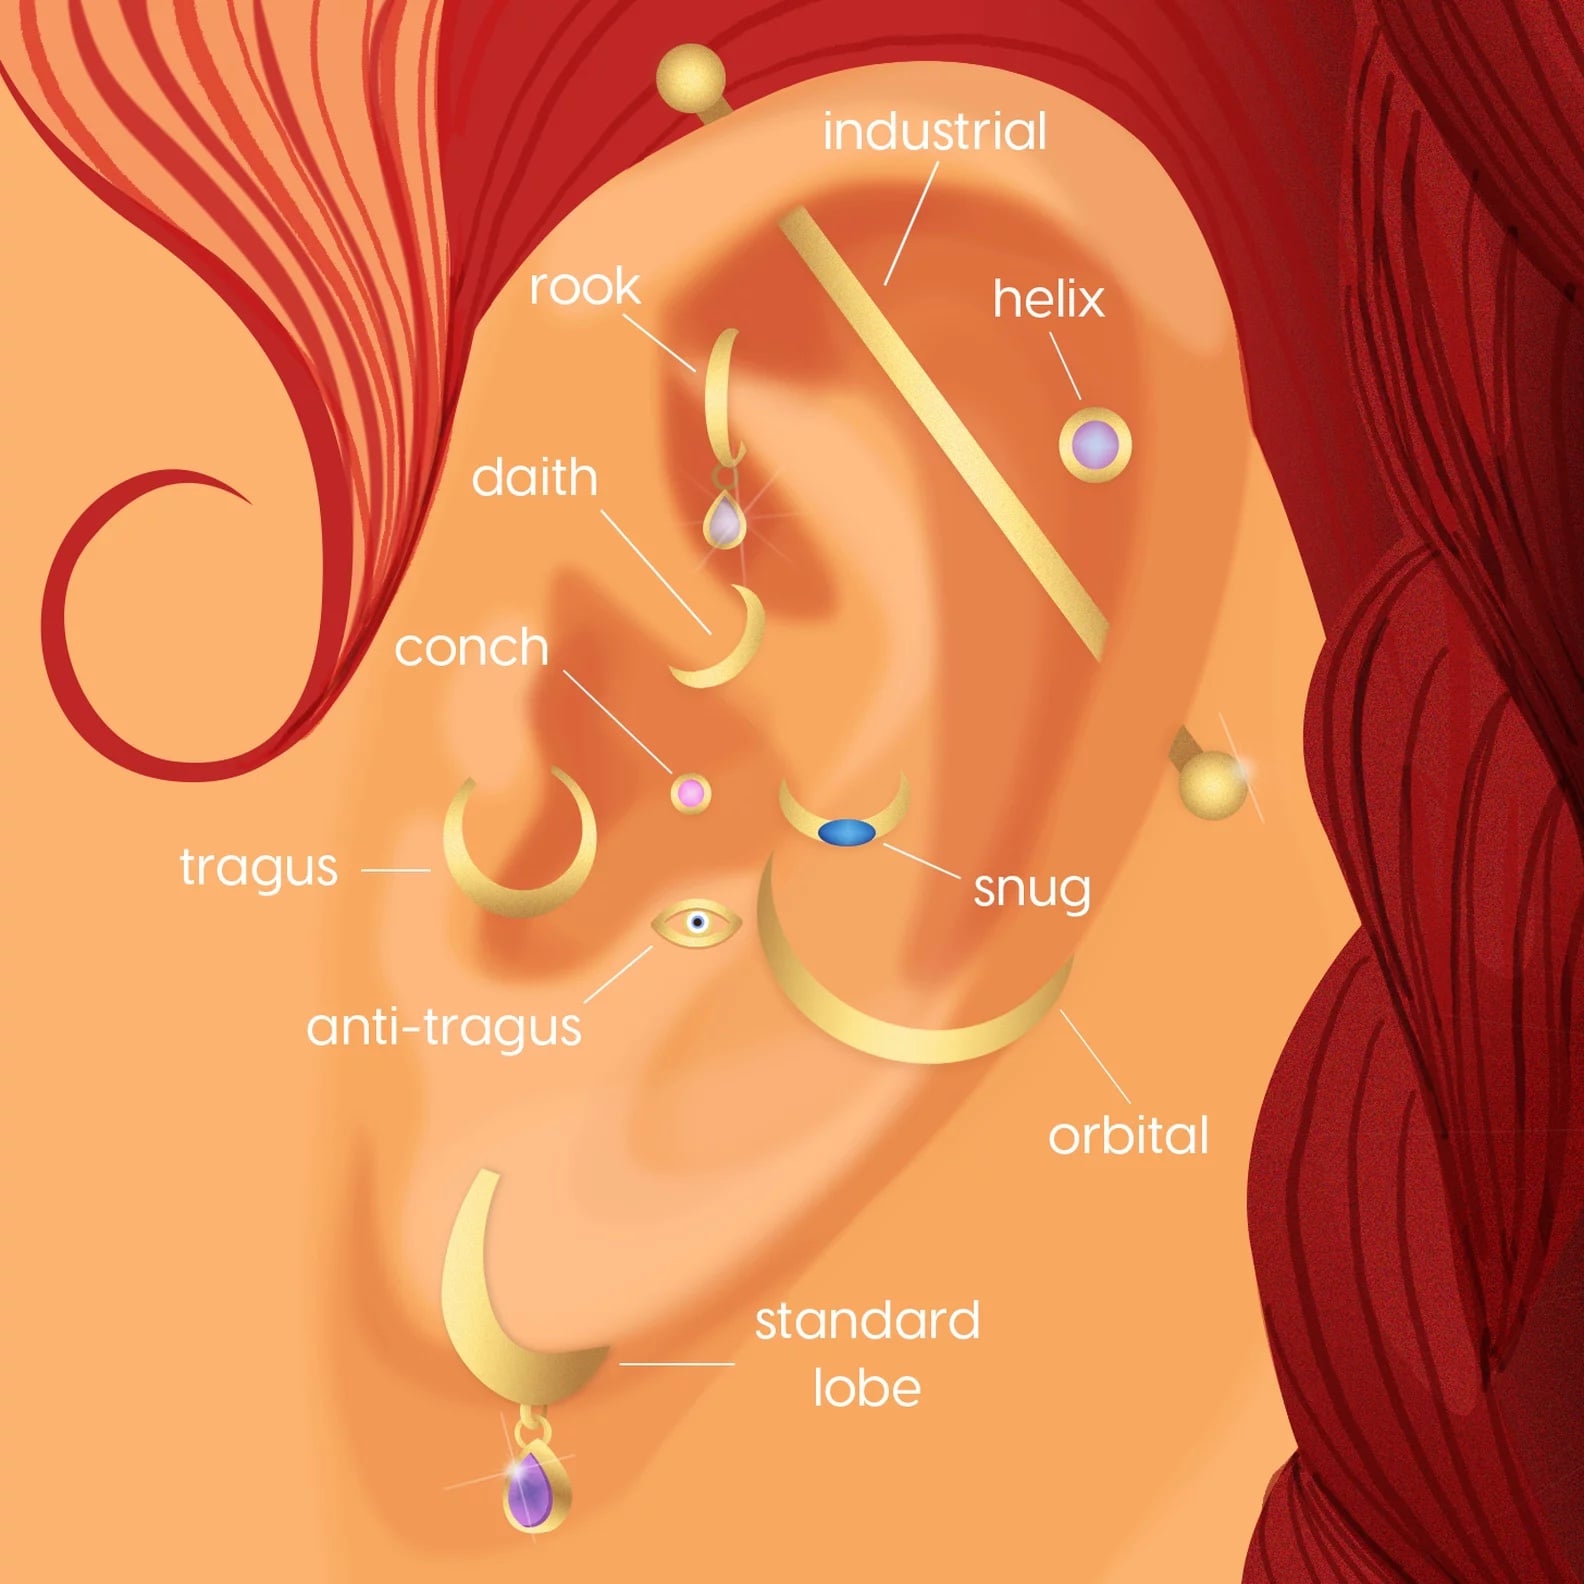 Helix Piercings: What to Know Before Getting One | POPSUGAR Beauty